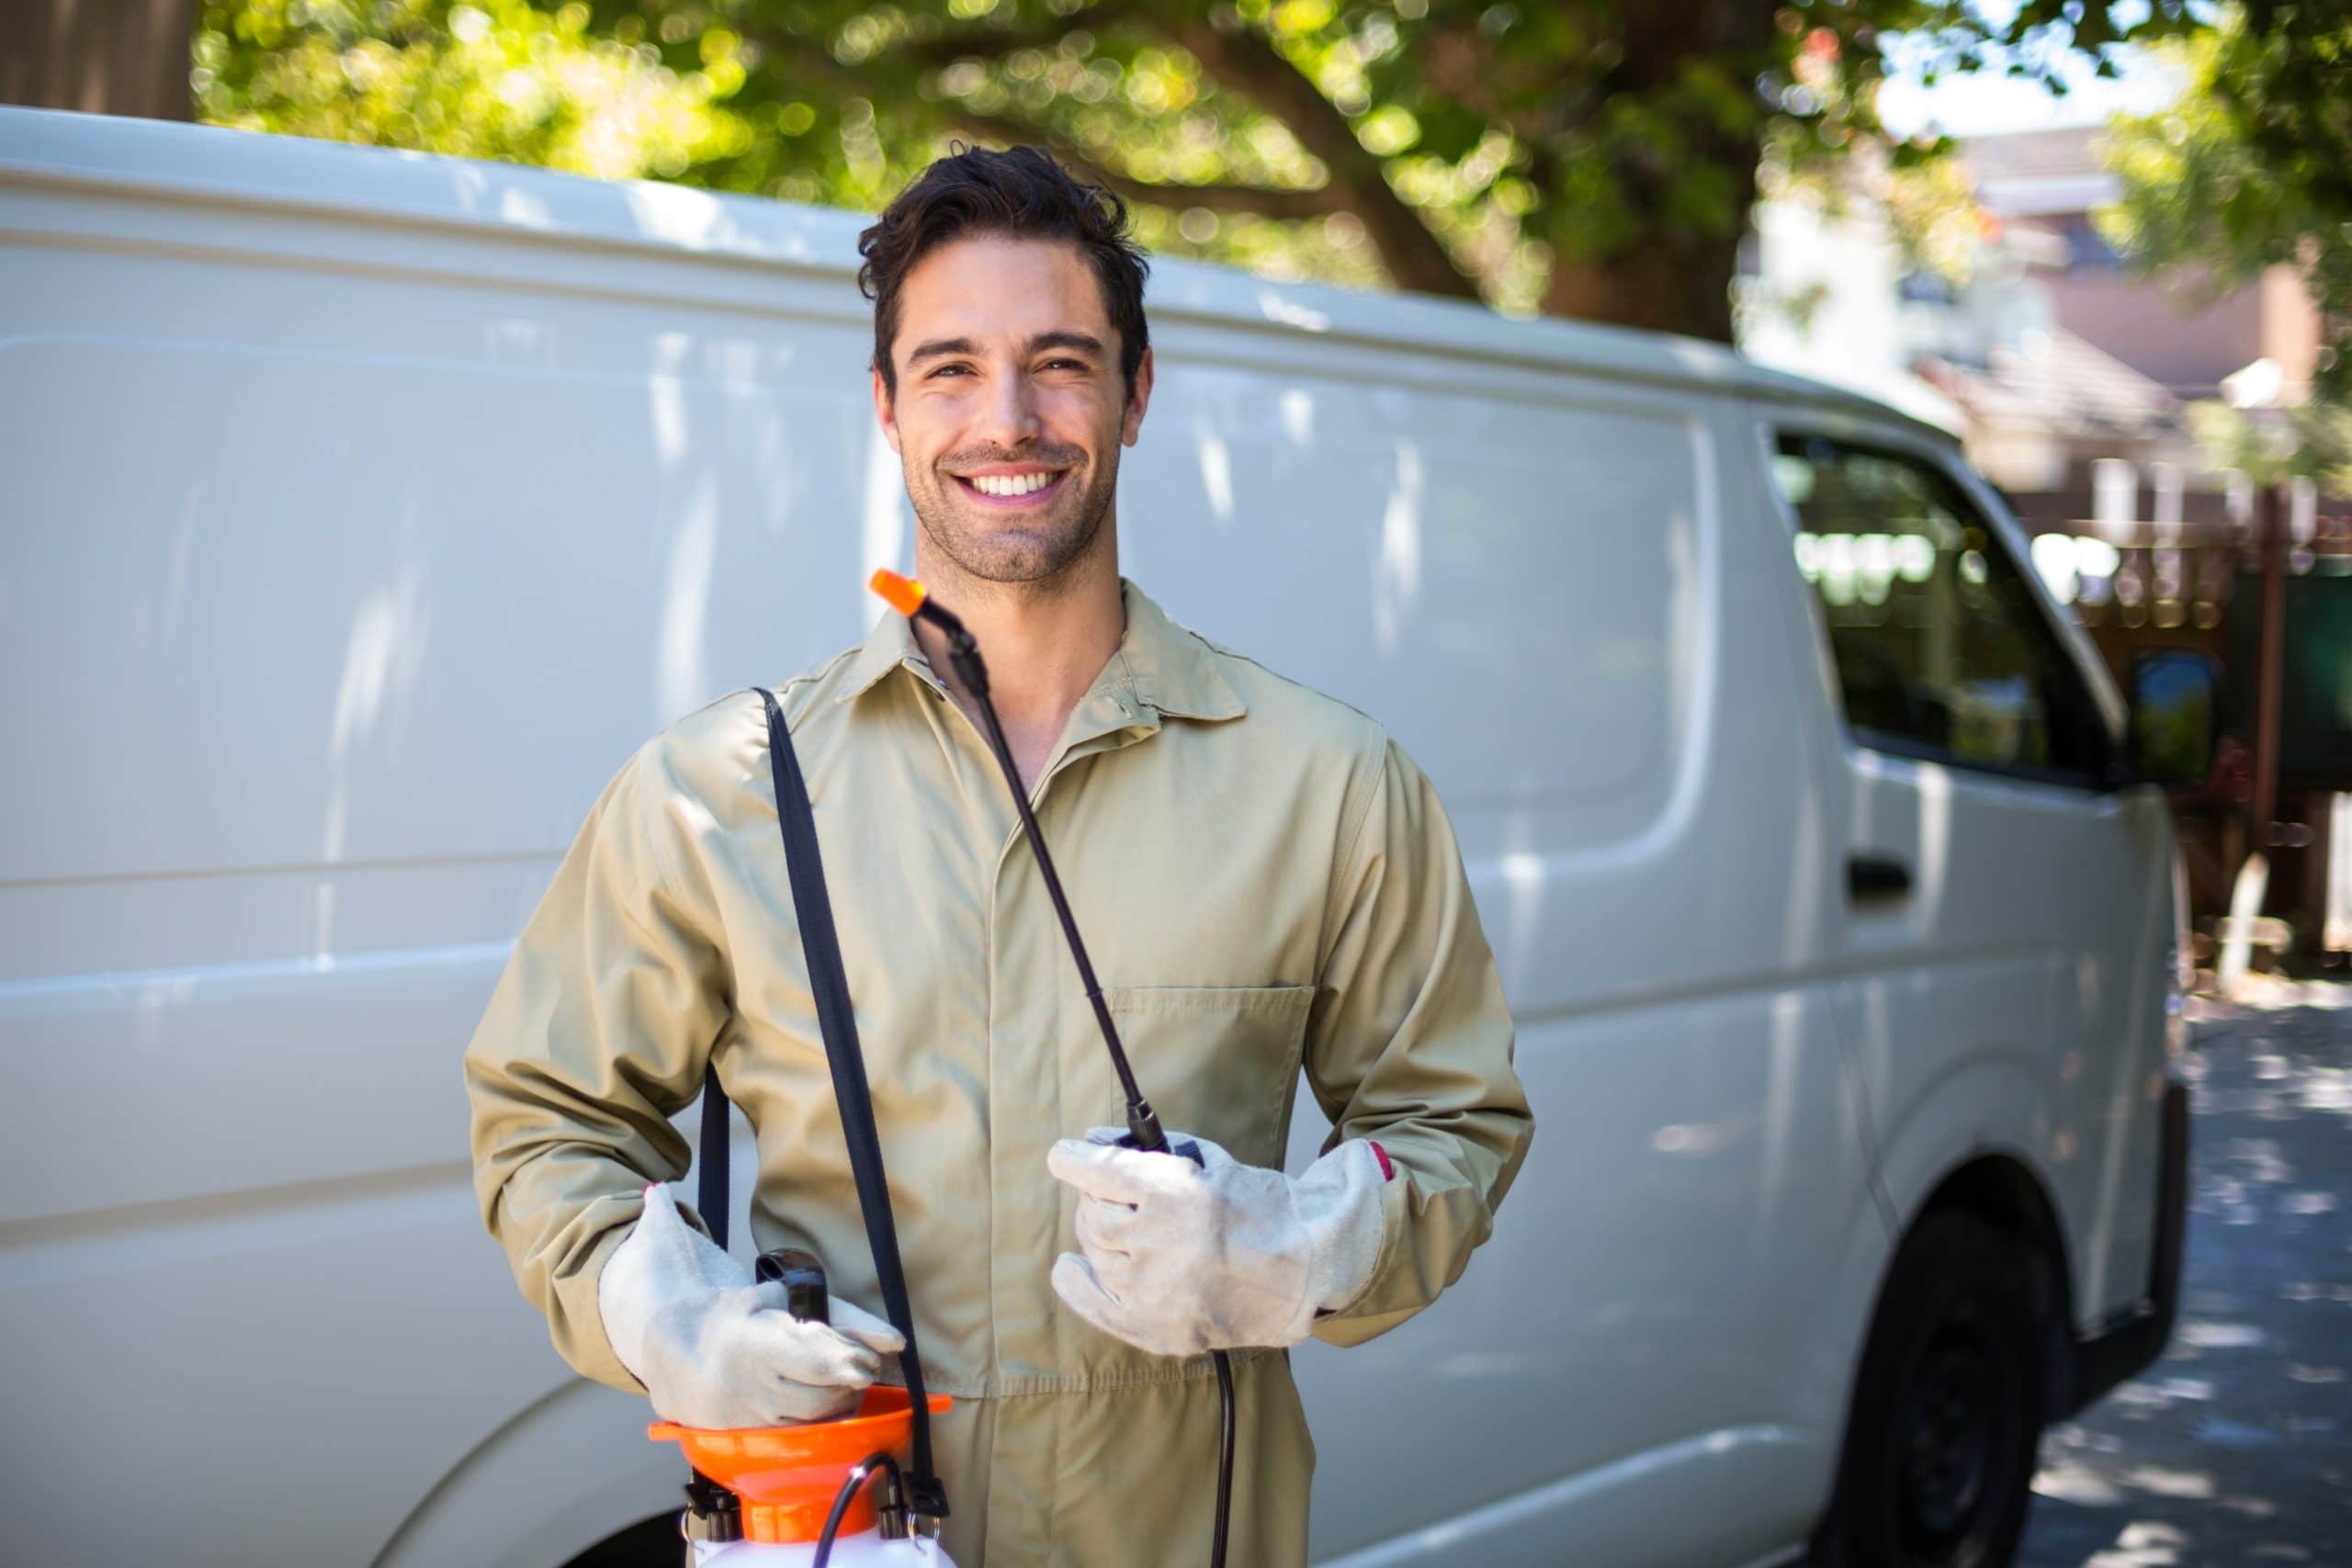 Smiling pest management worker in front of a company vehicle